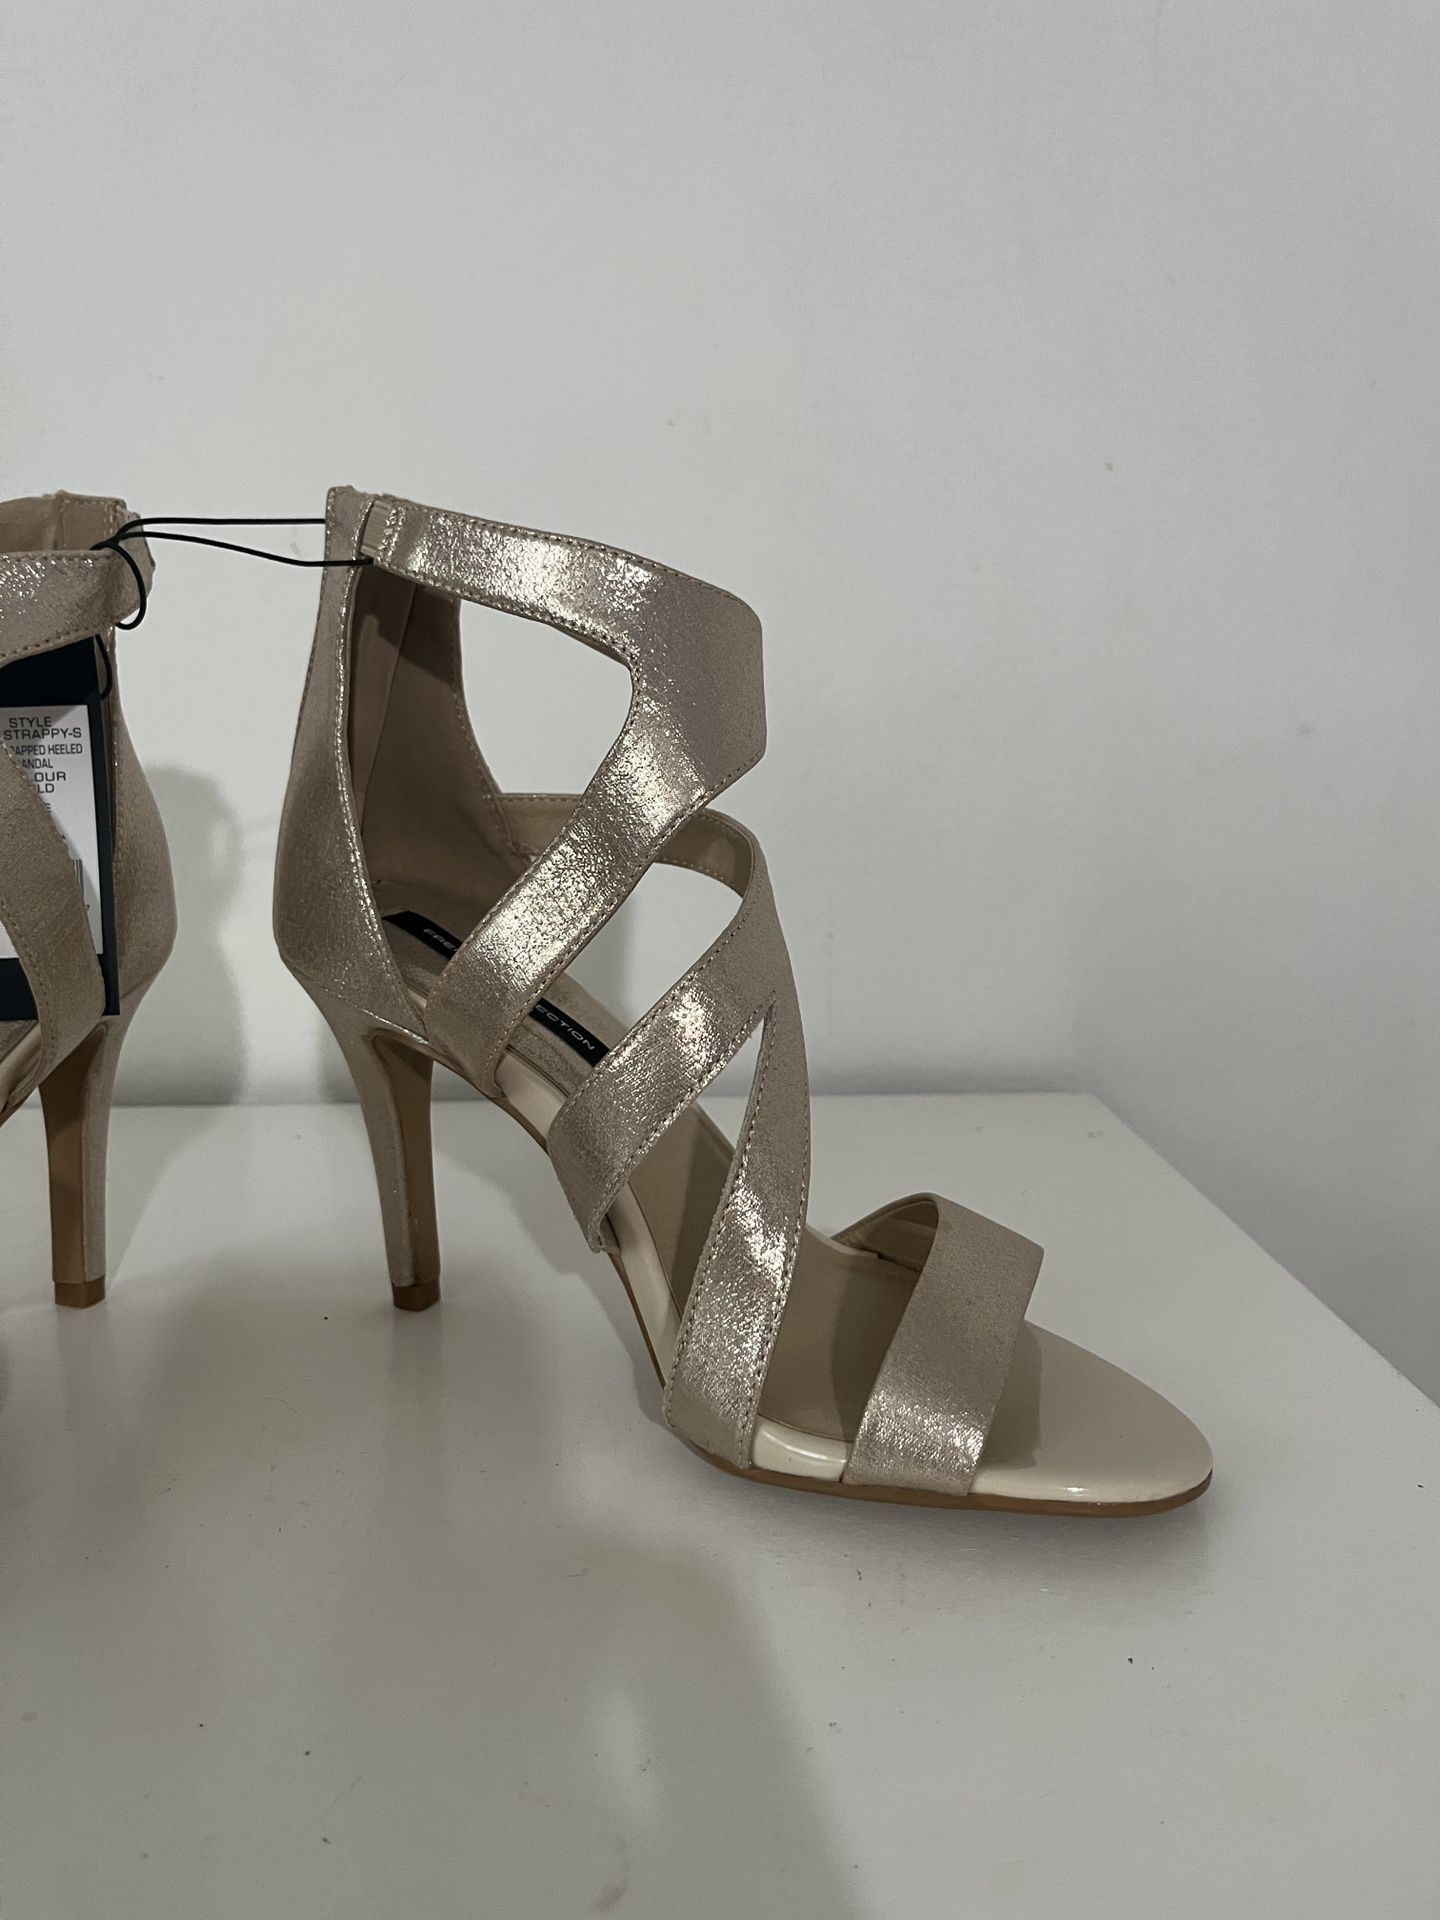 Heels - French collection Brand 